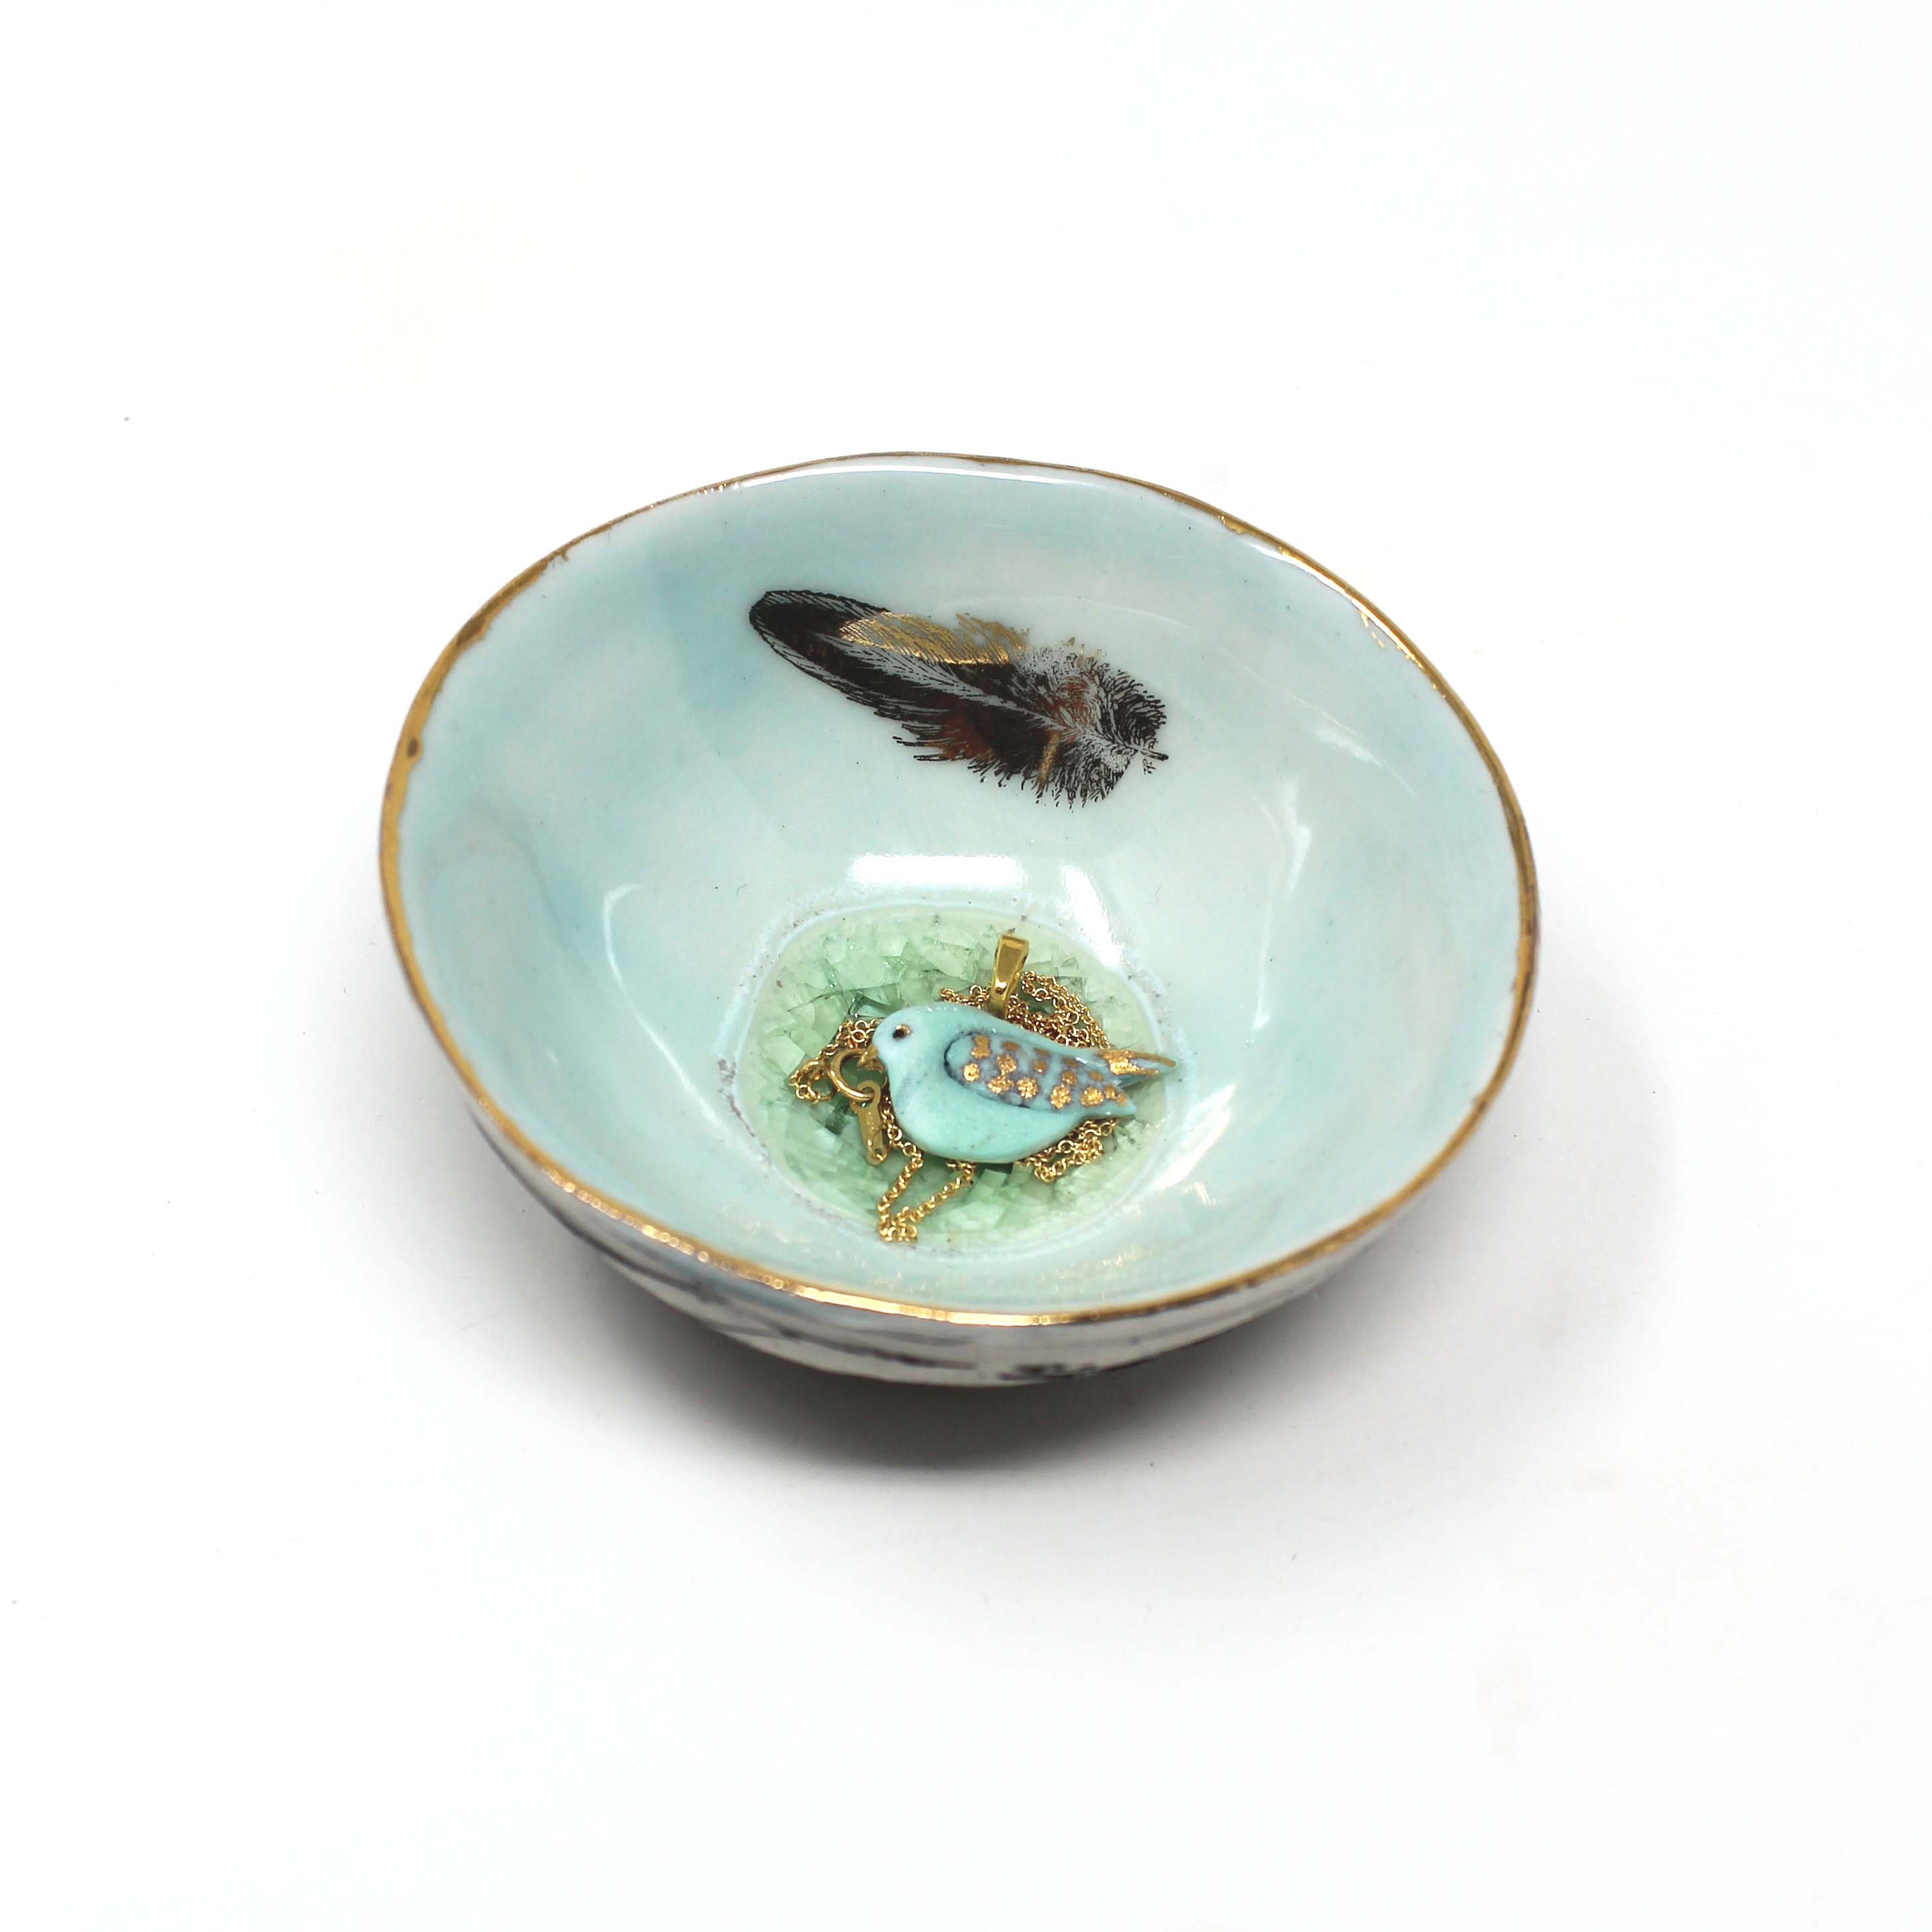 Nest Bowl, Feather, Small